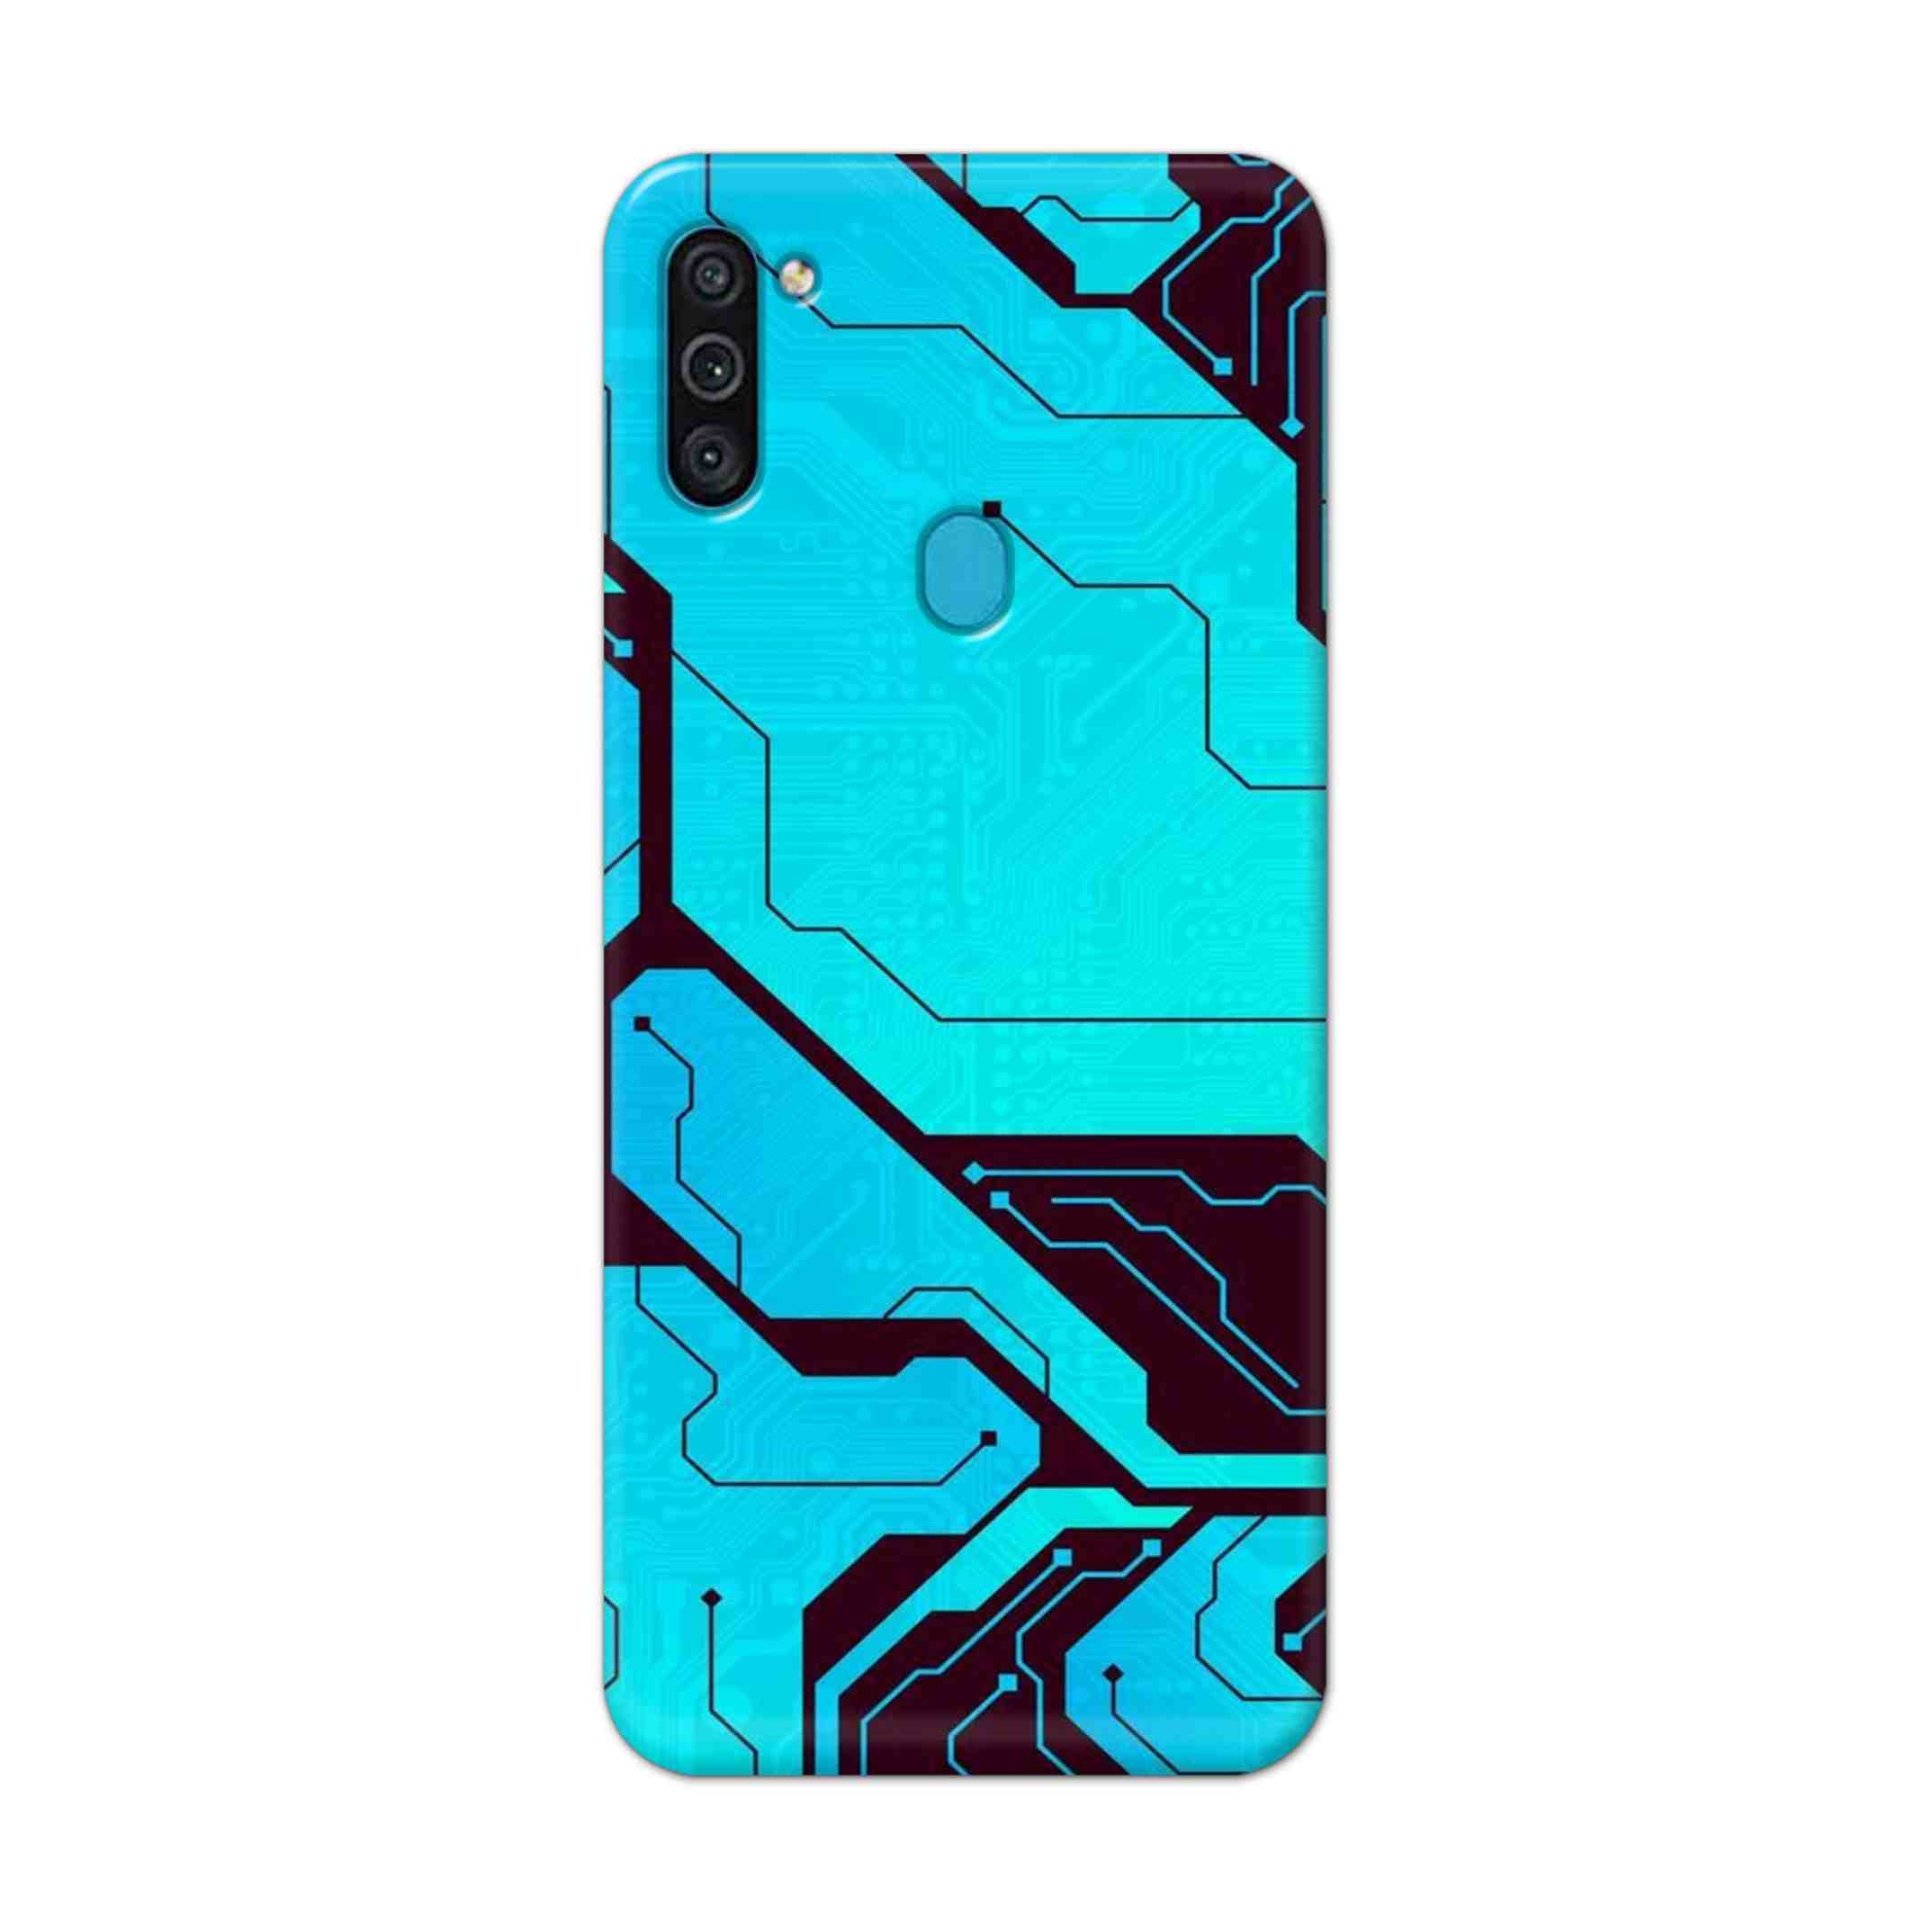 Buy Futuristic Line Hard Back Mobile Phone Case Cover For Samsung Galaxy M11 Online